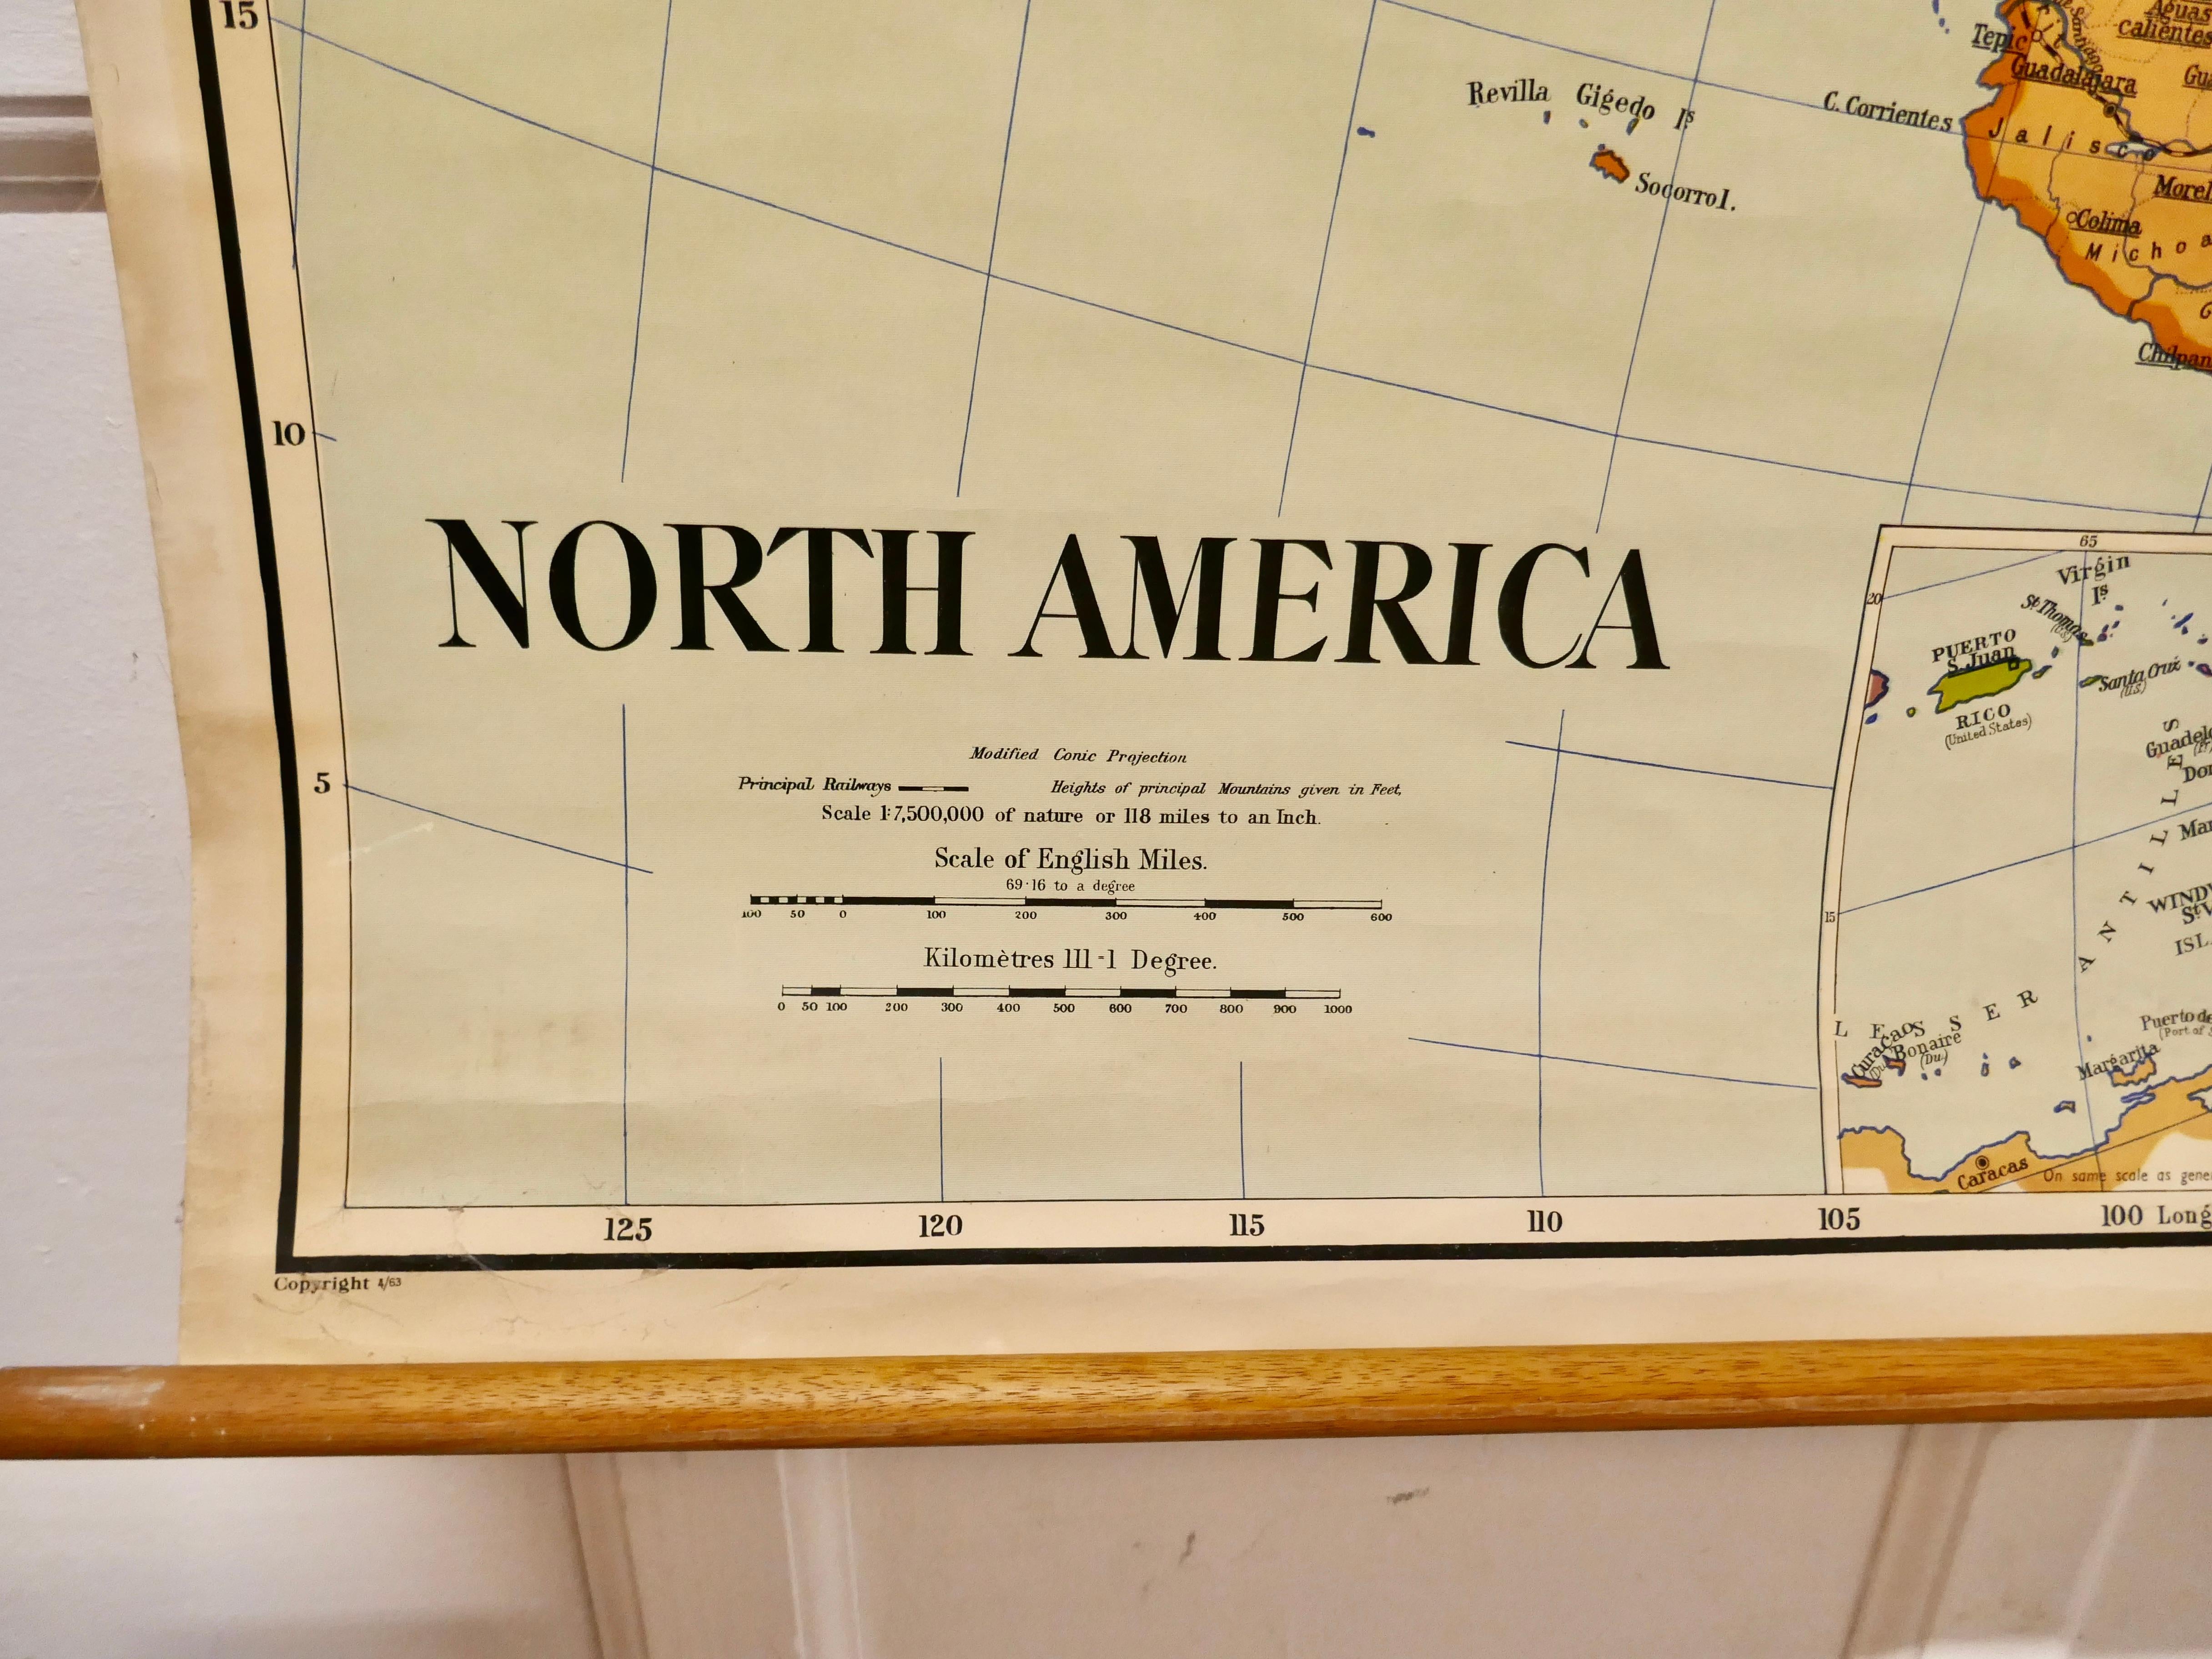 Large University chart “Political Map of North America” by Bacon

W&A K Johnston’s Charts of Political Maps by G W Bacon,

This is colorful Physical map of North America, it is large lithograph set on Linen mounted on wooden rods, the chart is